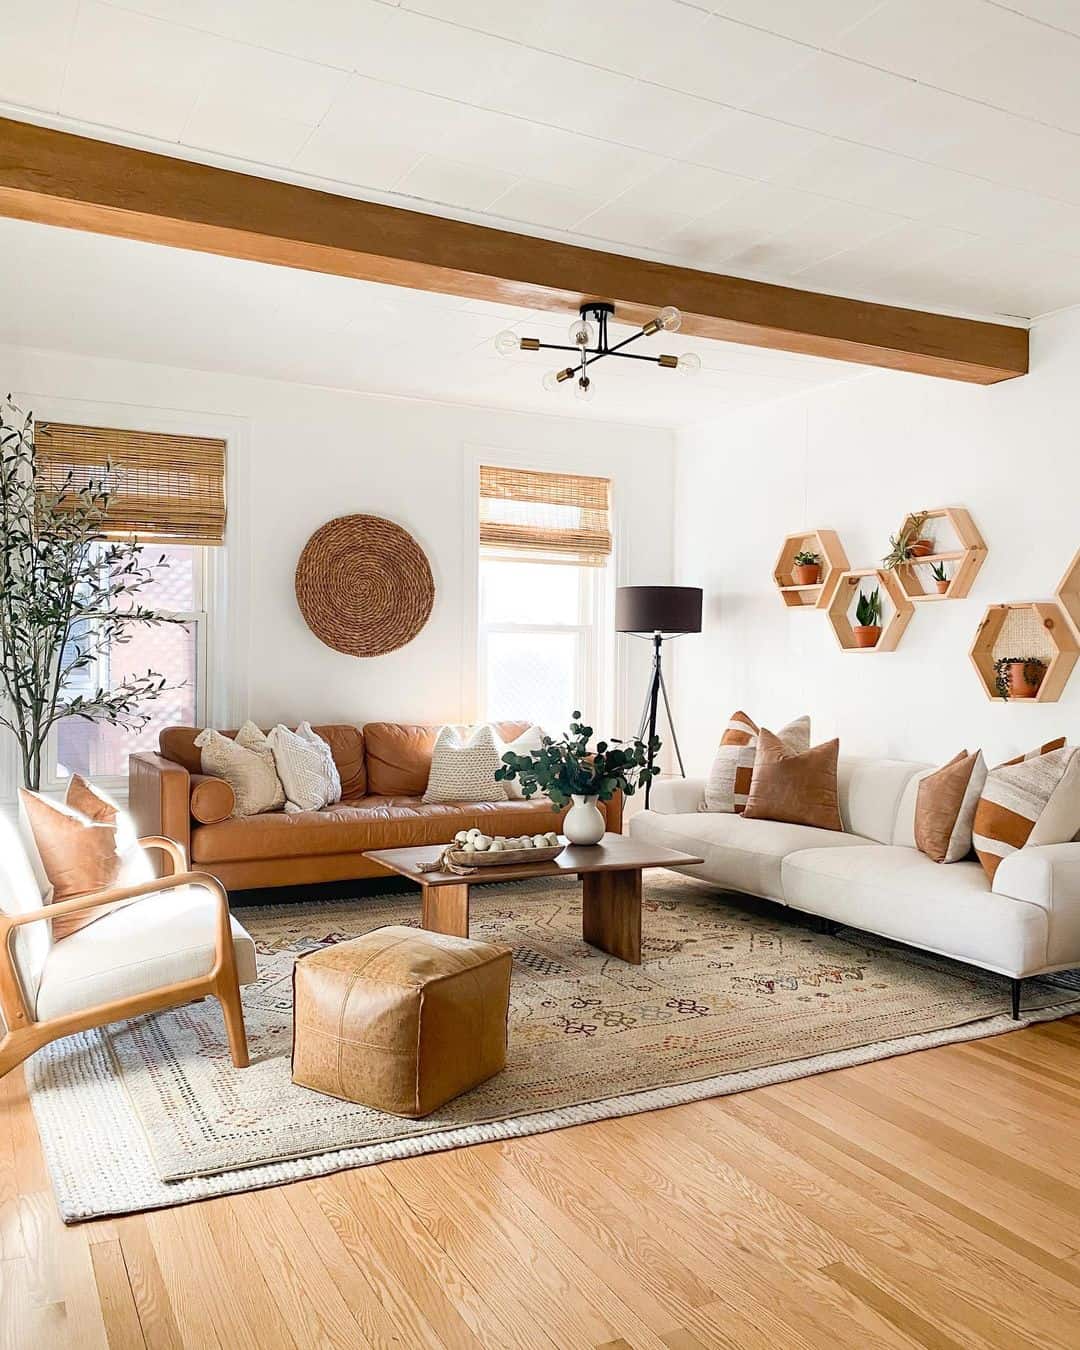 Boho Chic Living Room: Faux Exposed Wood Beams